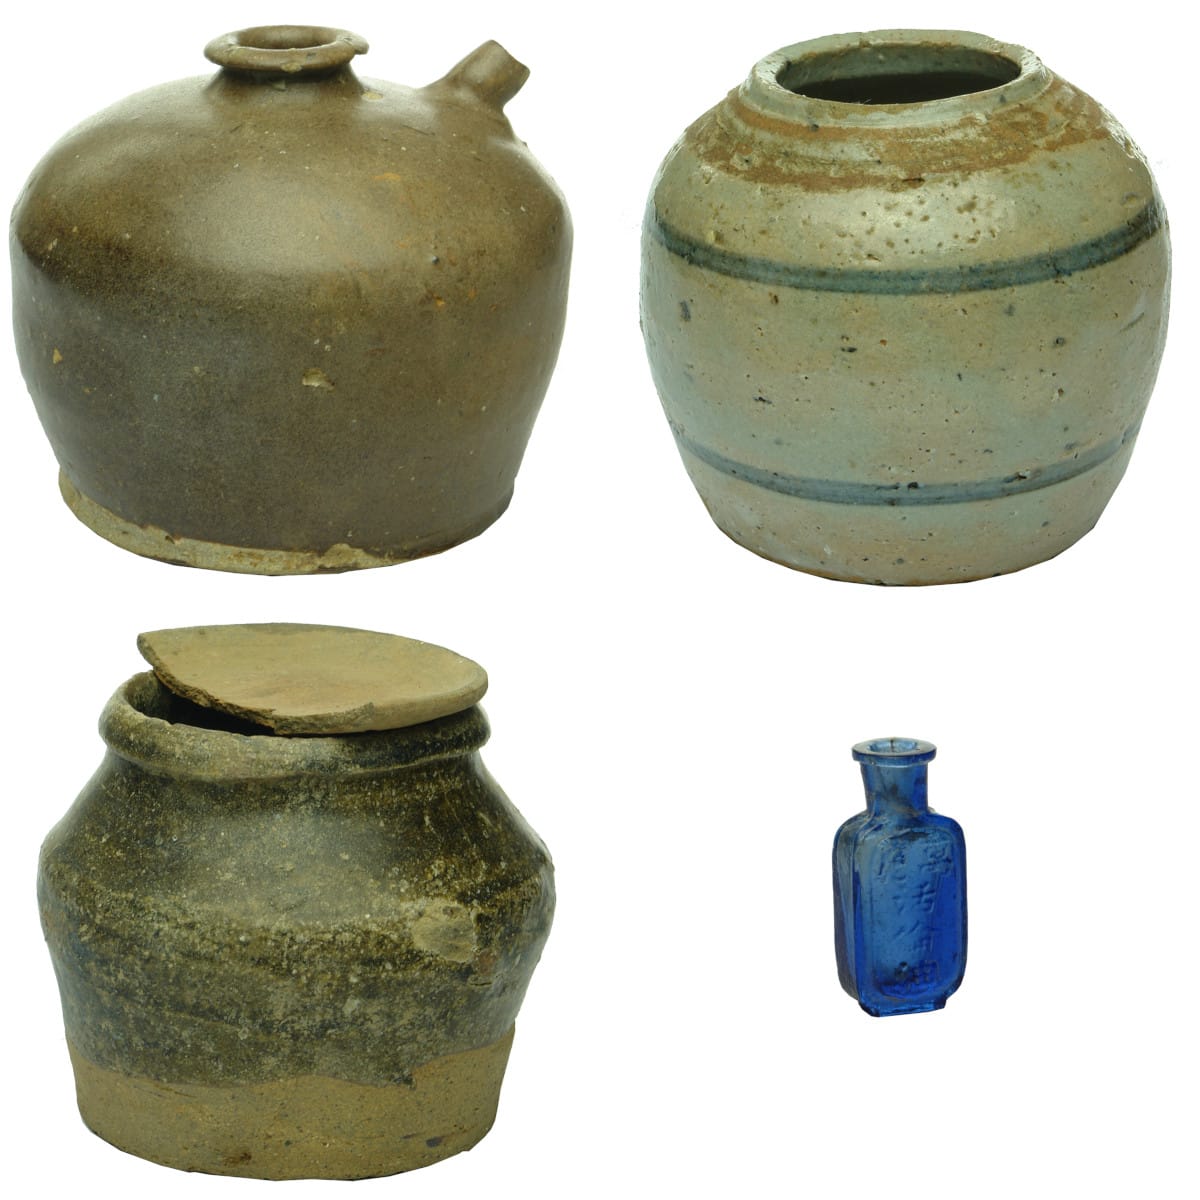 Four Chinese Items: Soy Sauce; Blue & White Ginger Jar; Small Bean Jar with a partial plate/lid; Blue Medicine.